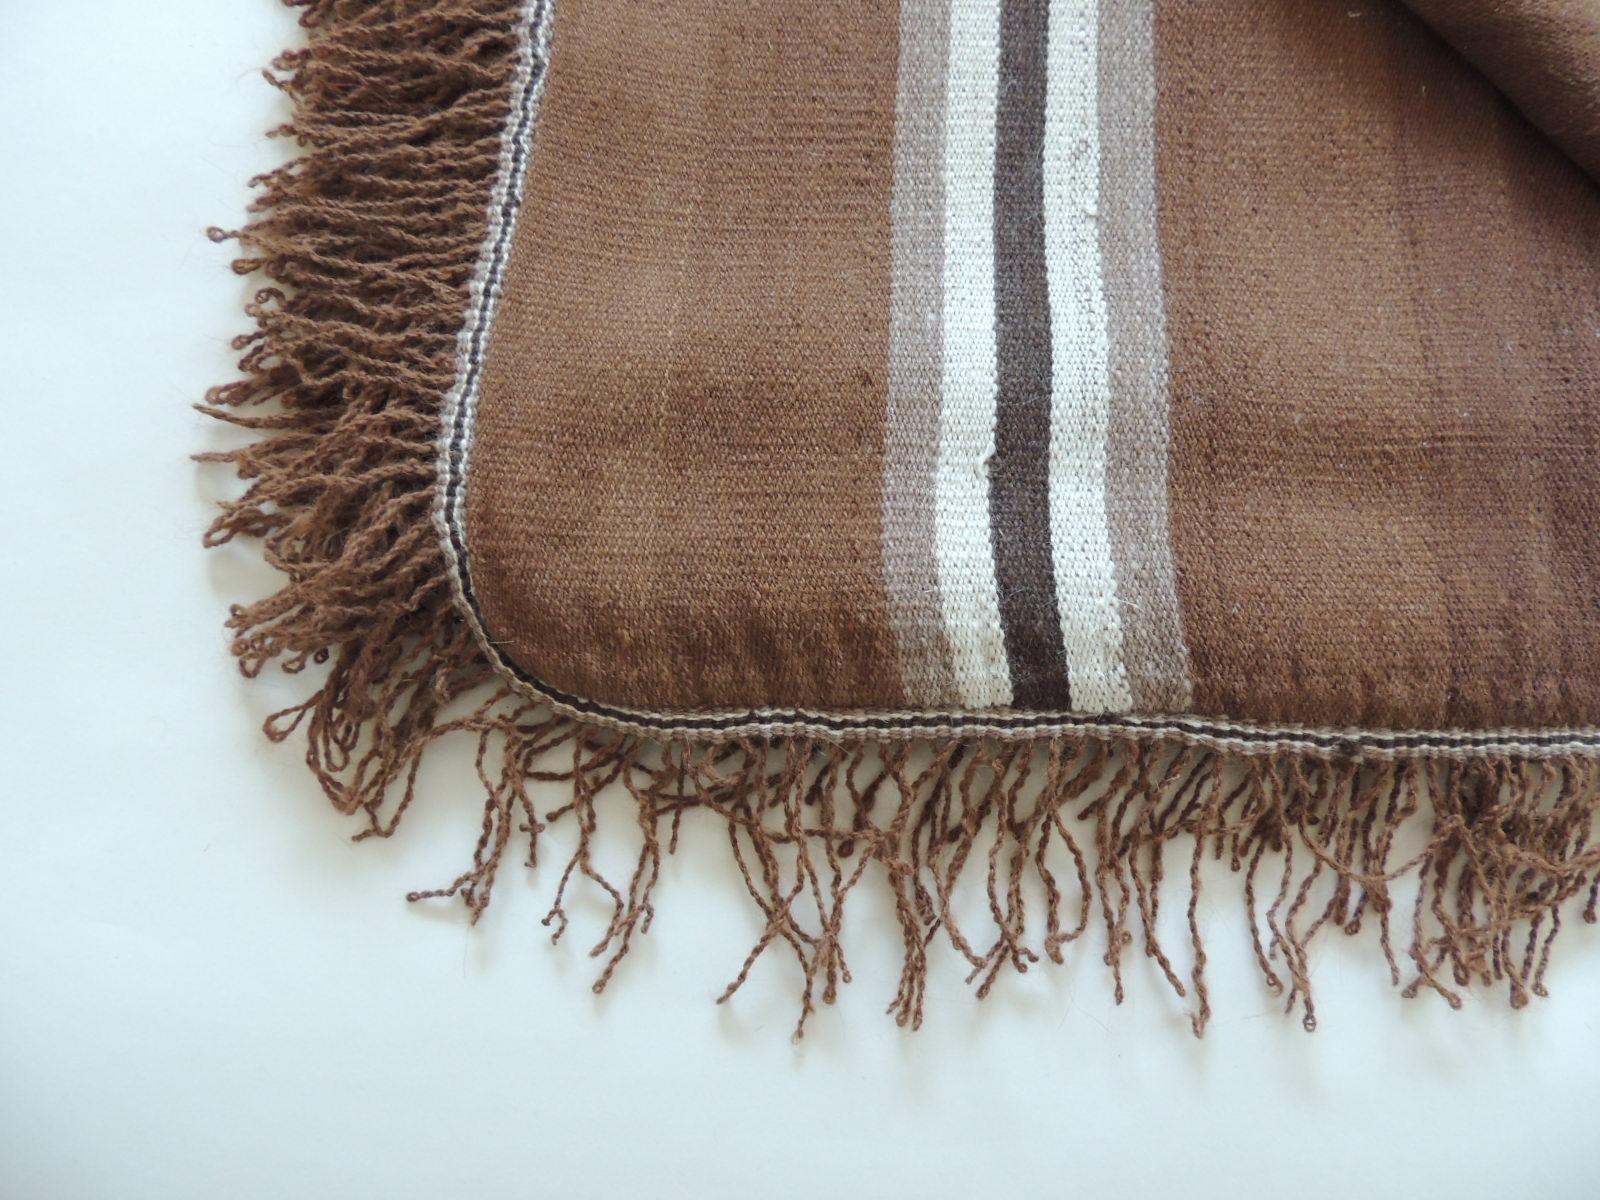 Vintage brown and tan stripe woven throw with fringes.
Light and dark stripes makes this throw unique.
2